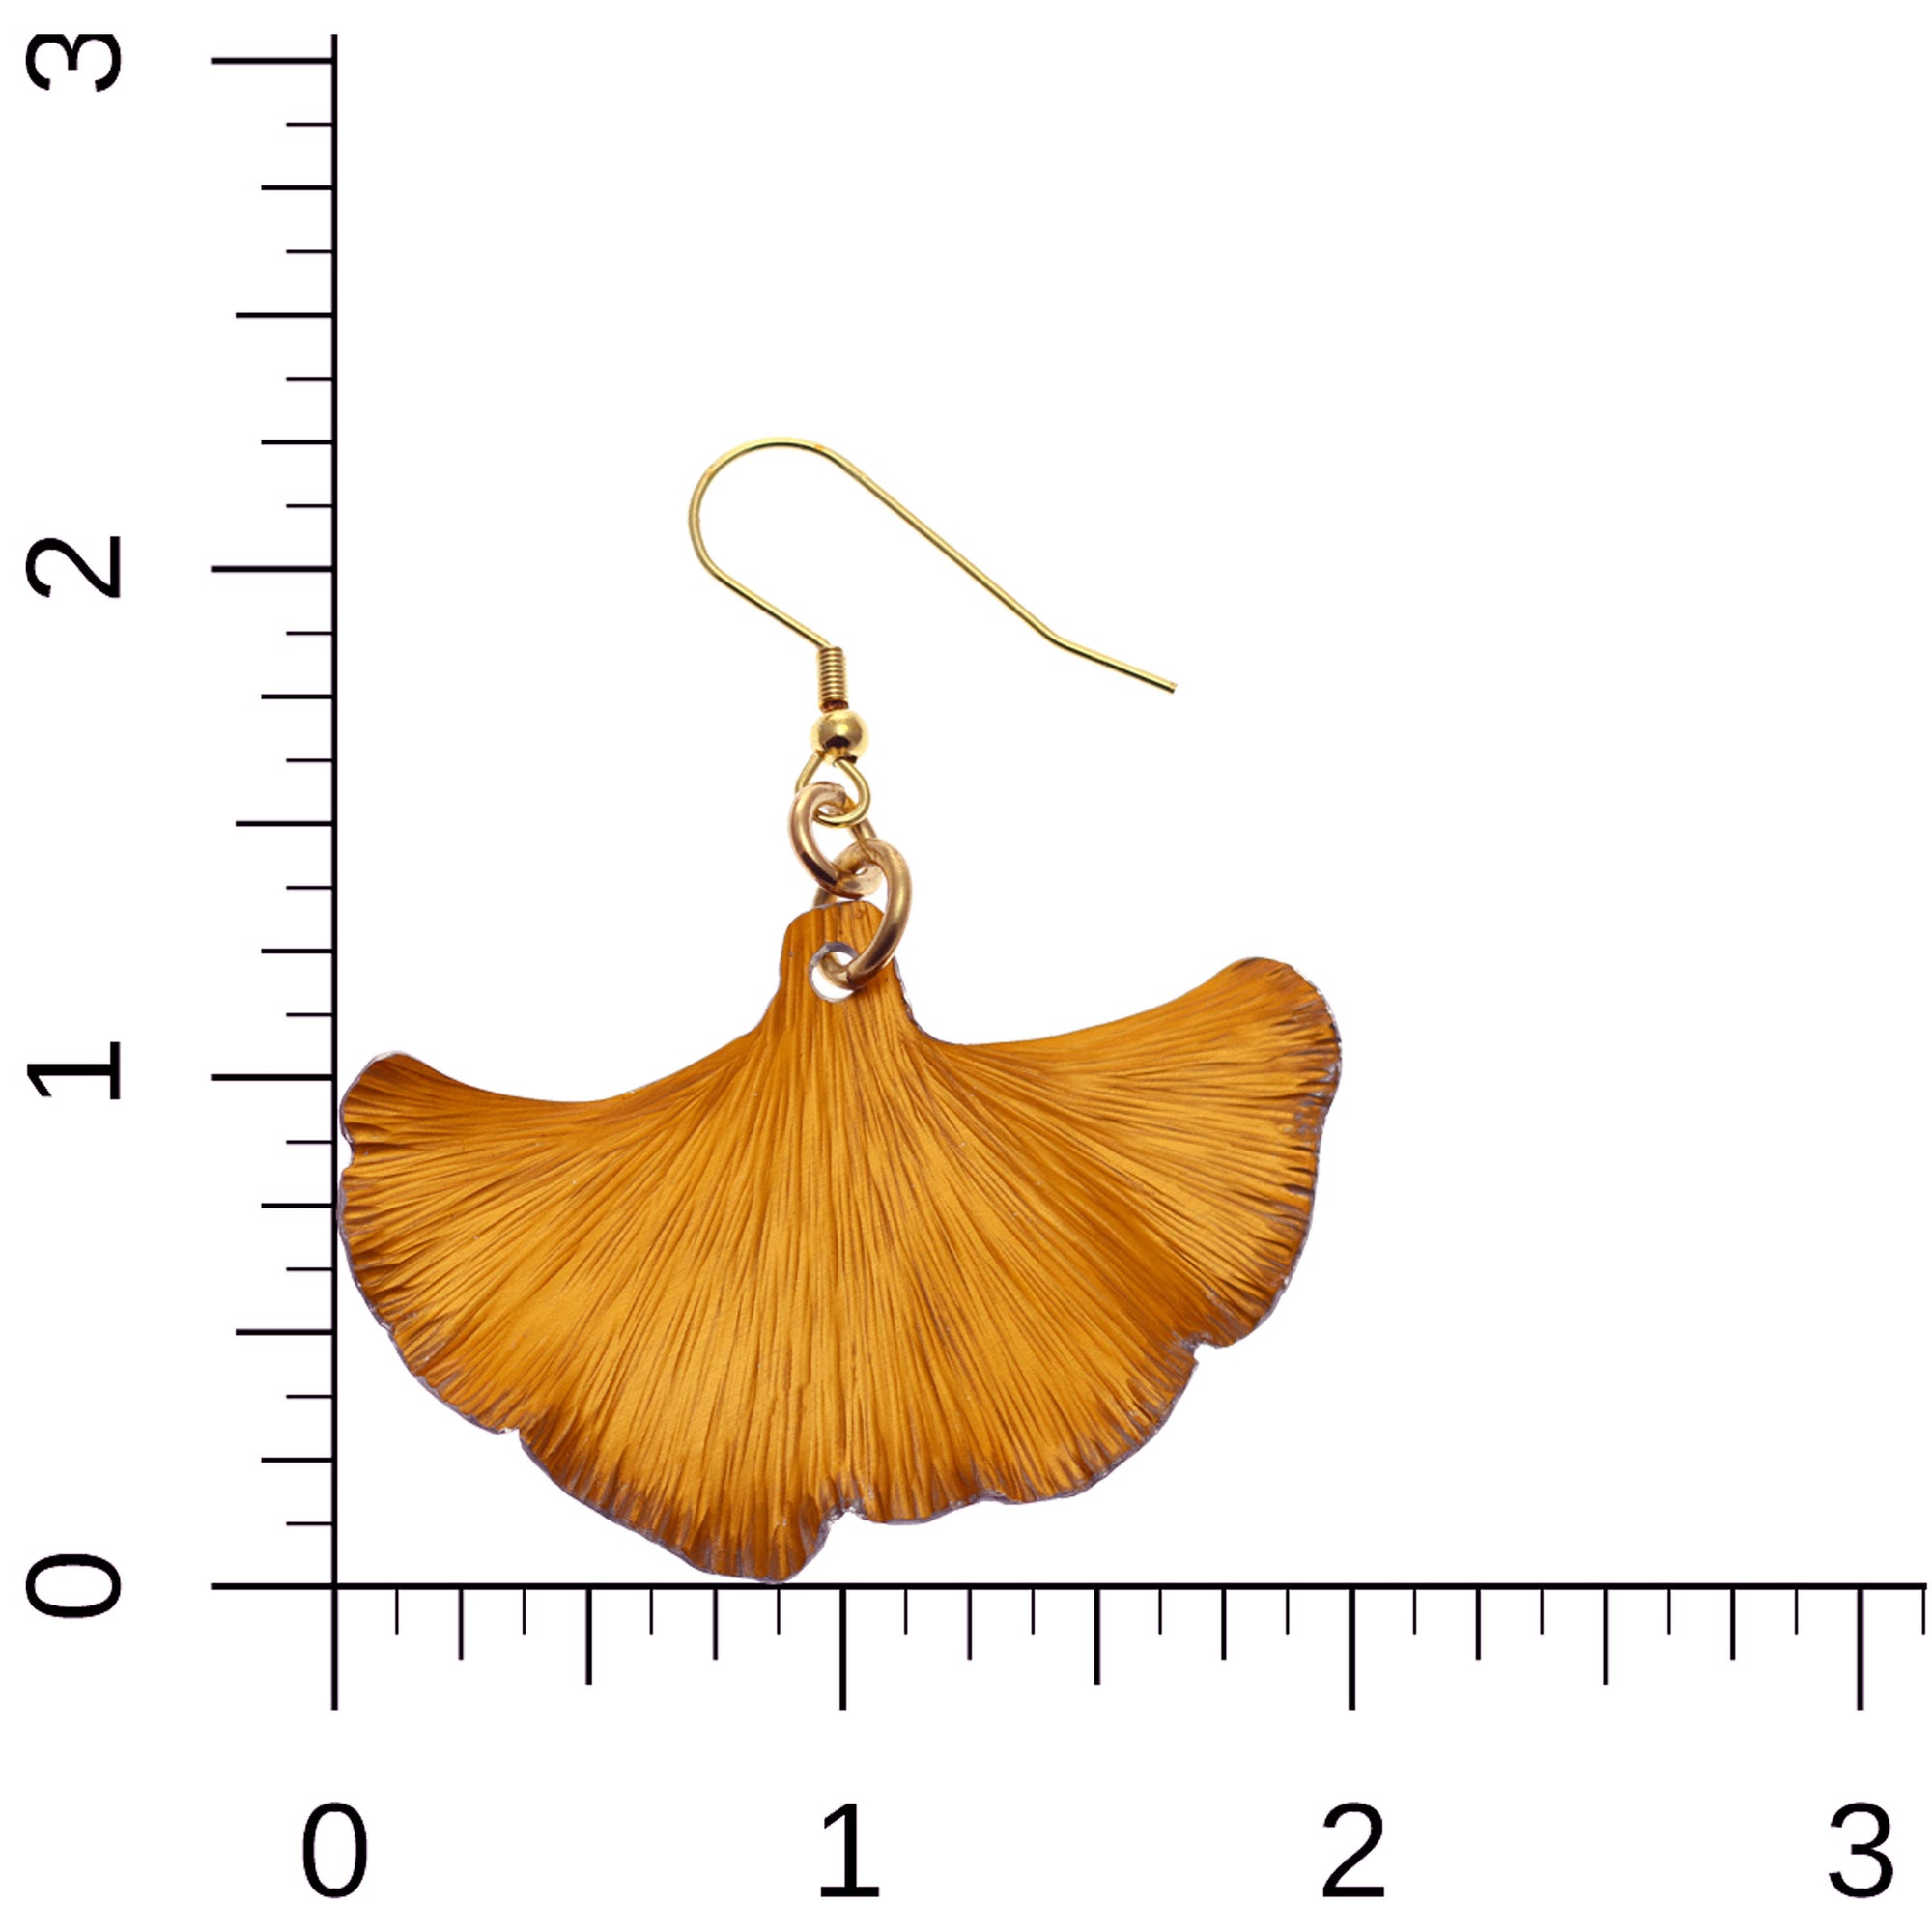 A orange anodized aluminum ginkgo leaf earring placed on a ruler, showcasing its delicate design and precise measurement.